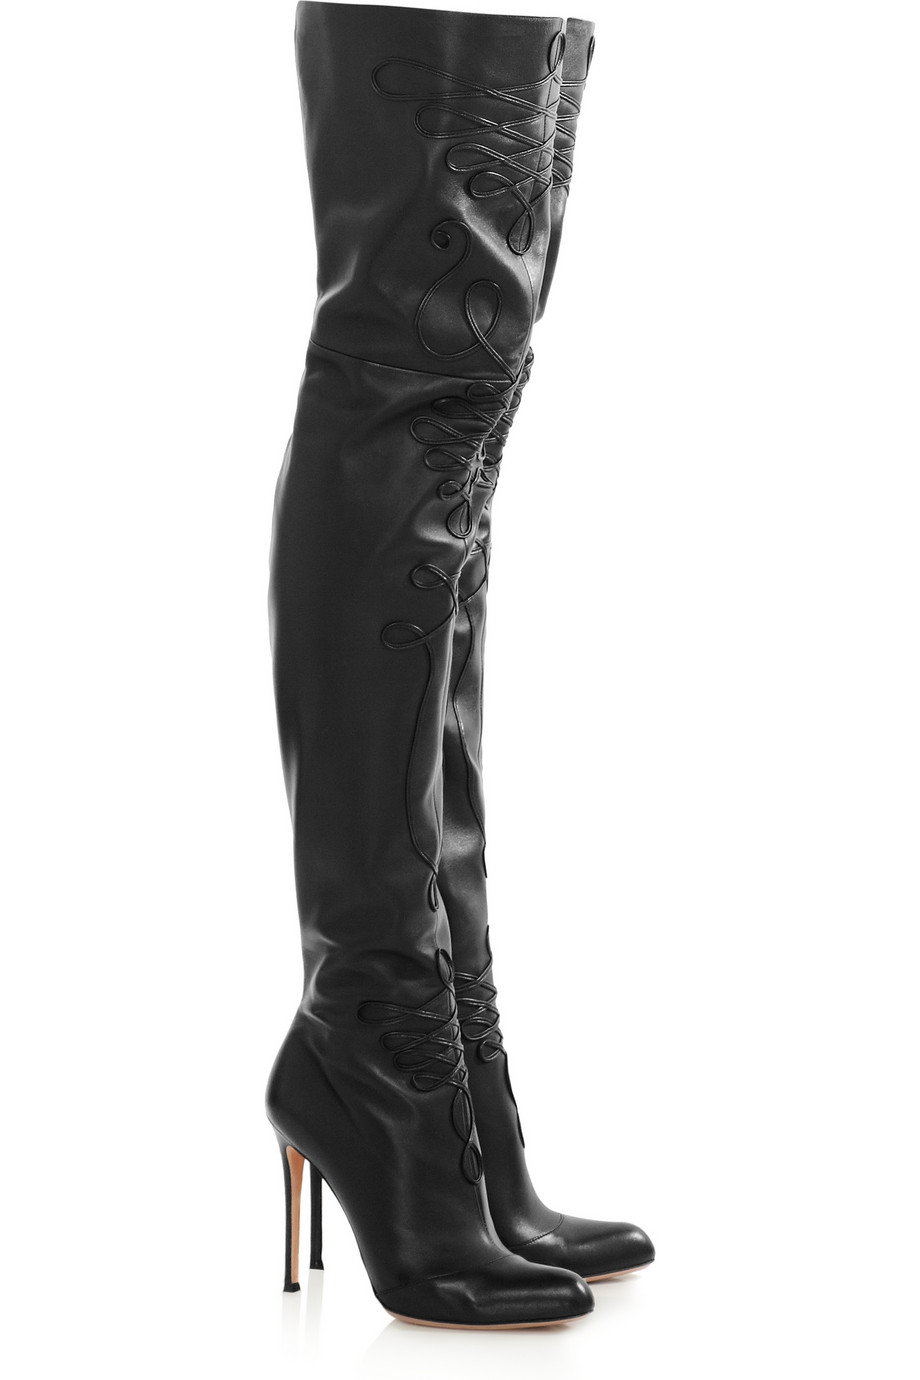 Lyst Altuzarra Embroidered Leather Thigh Boots In Black 2947